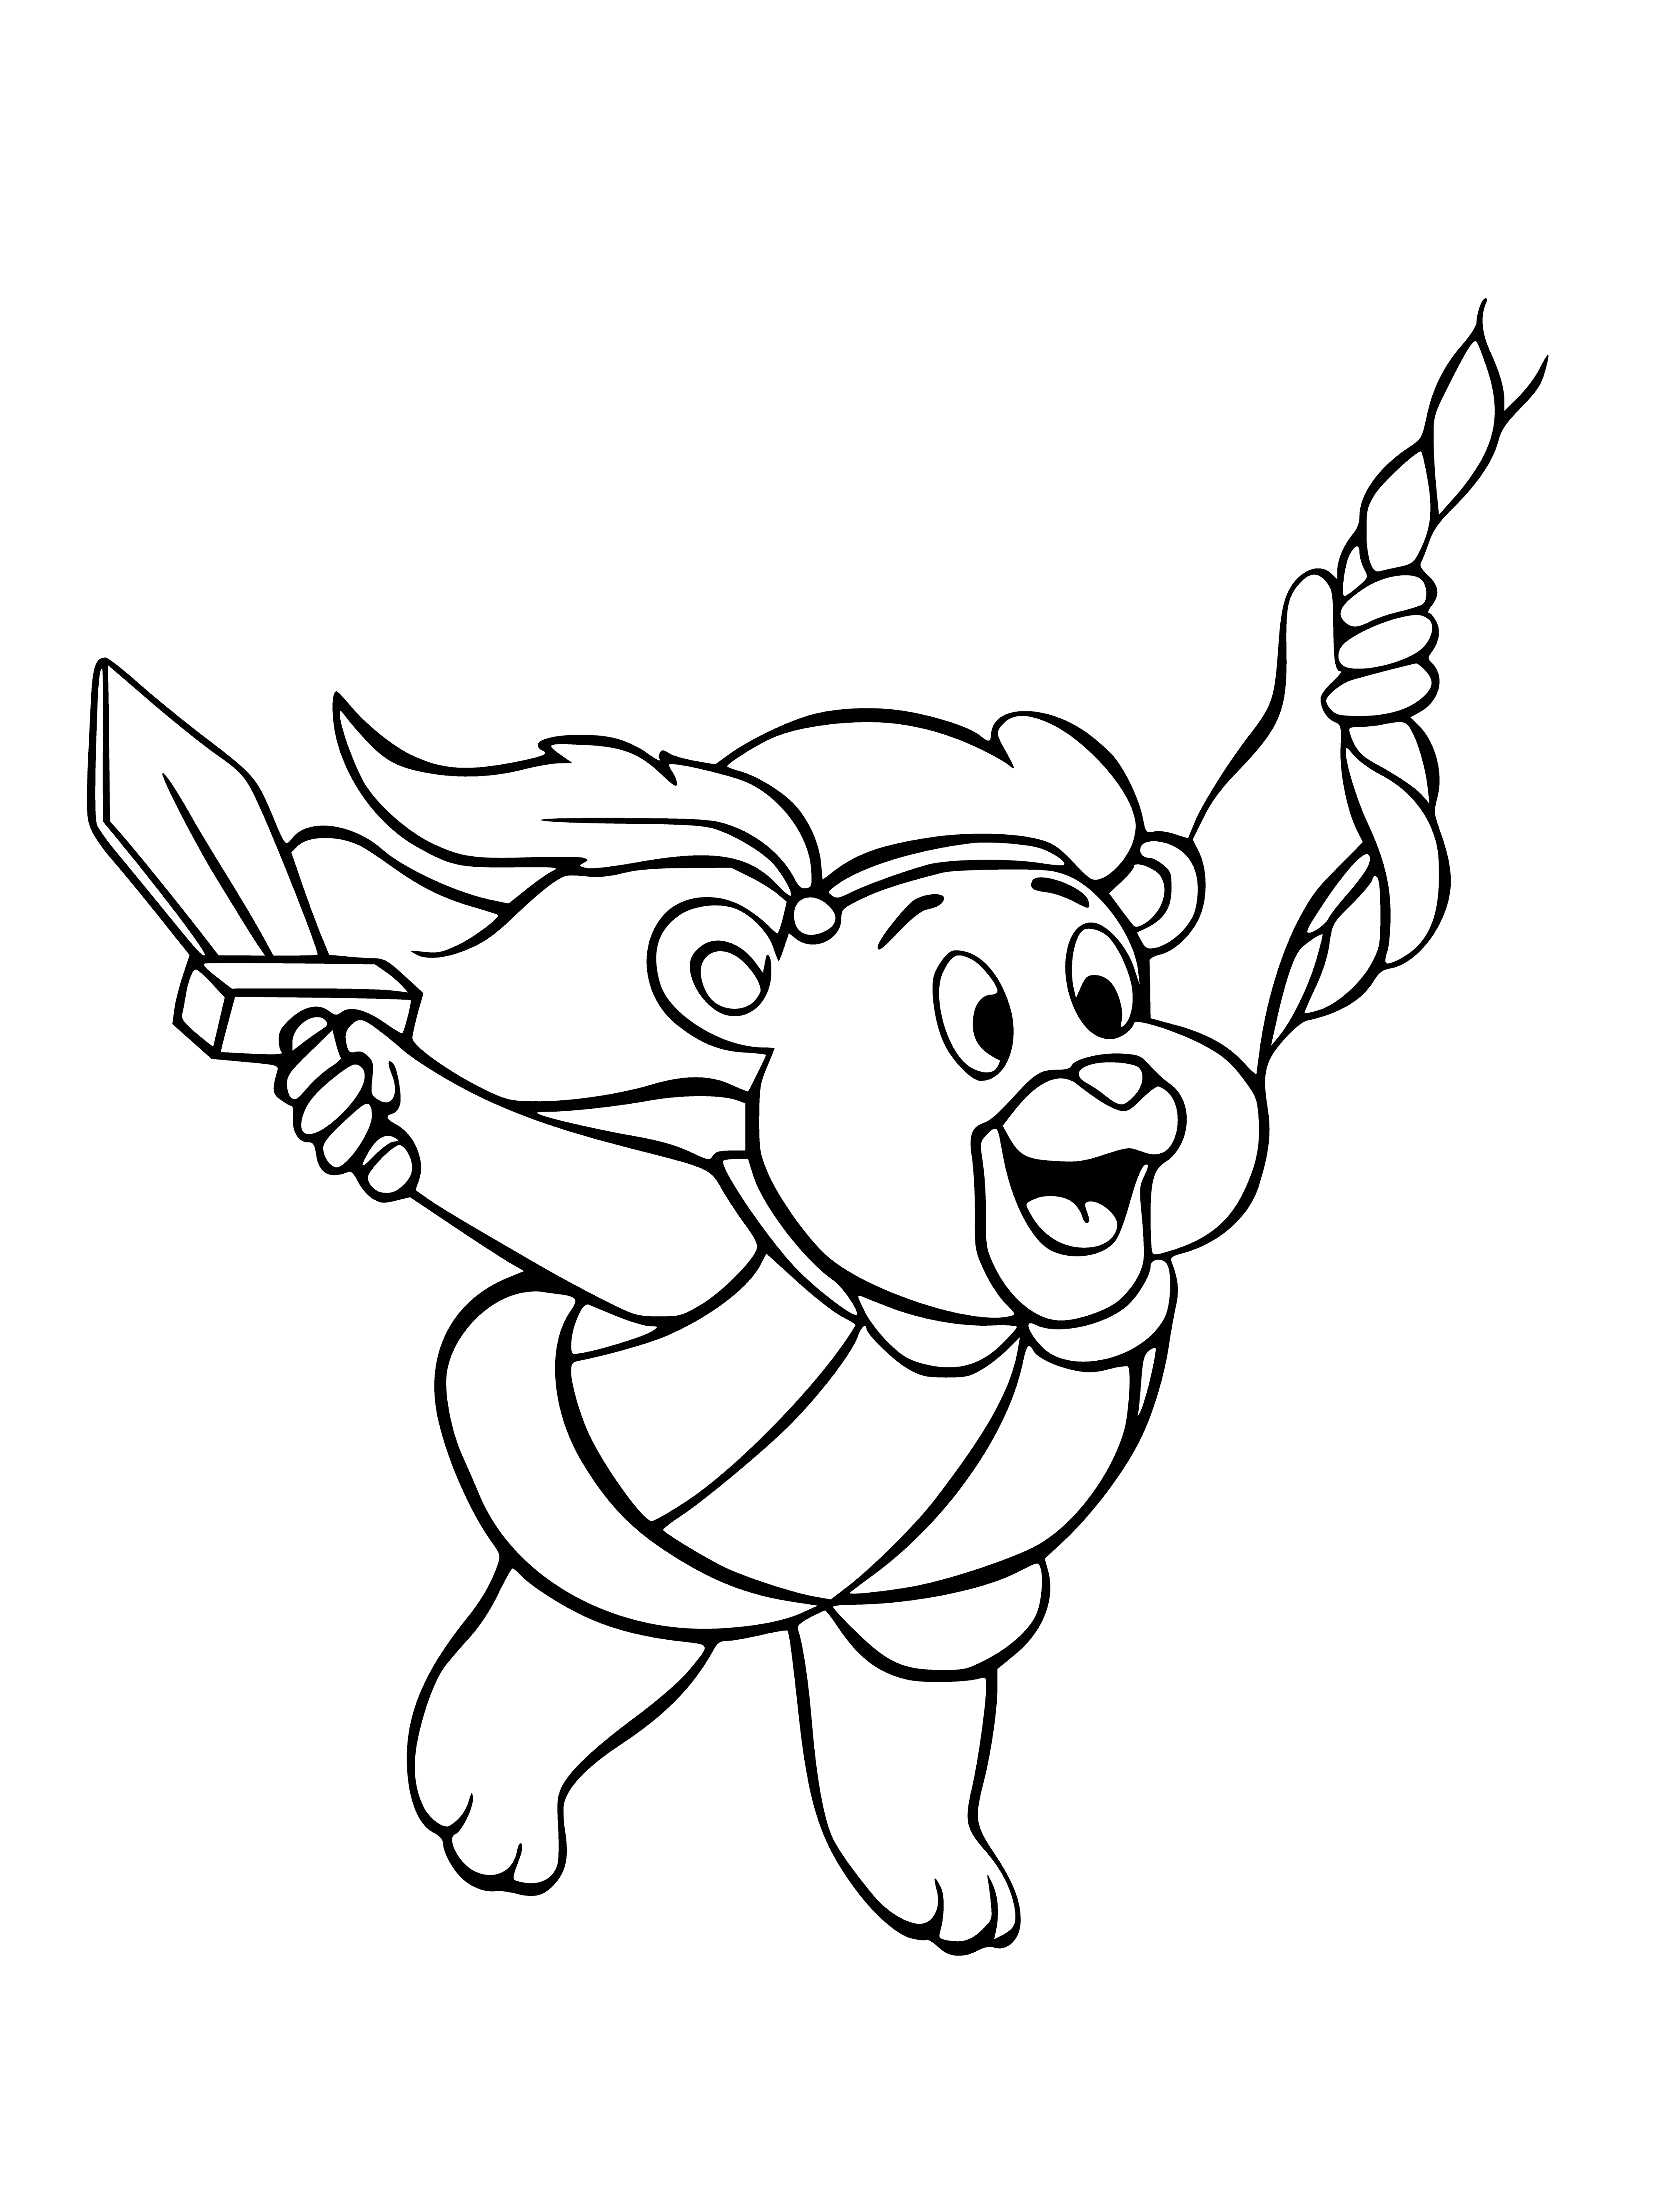 coloring page: Gummi Bears are gummy candy bears which come in various colors and flavors and are chewy to eat.